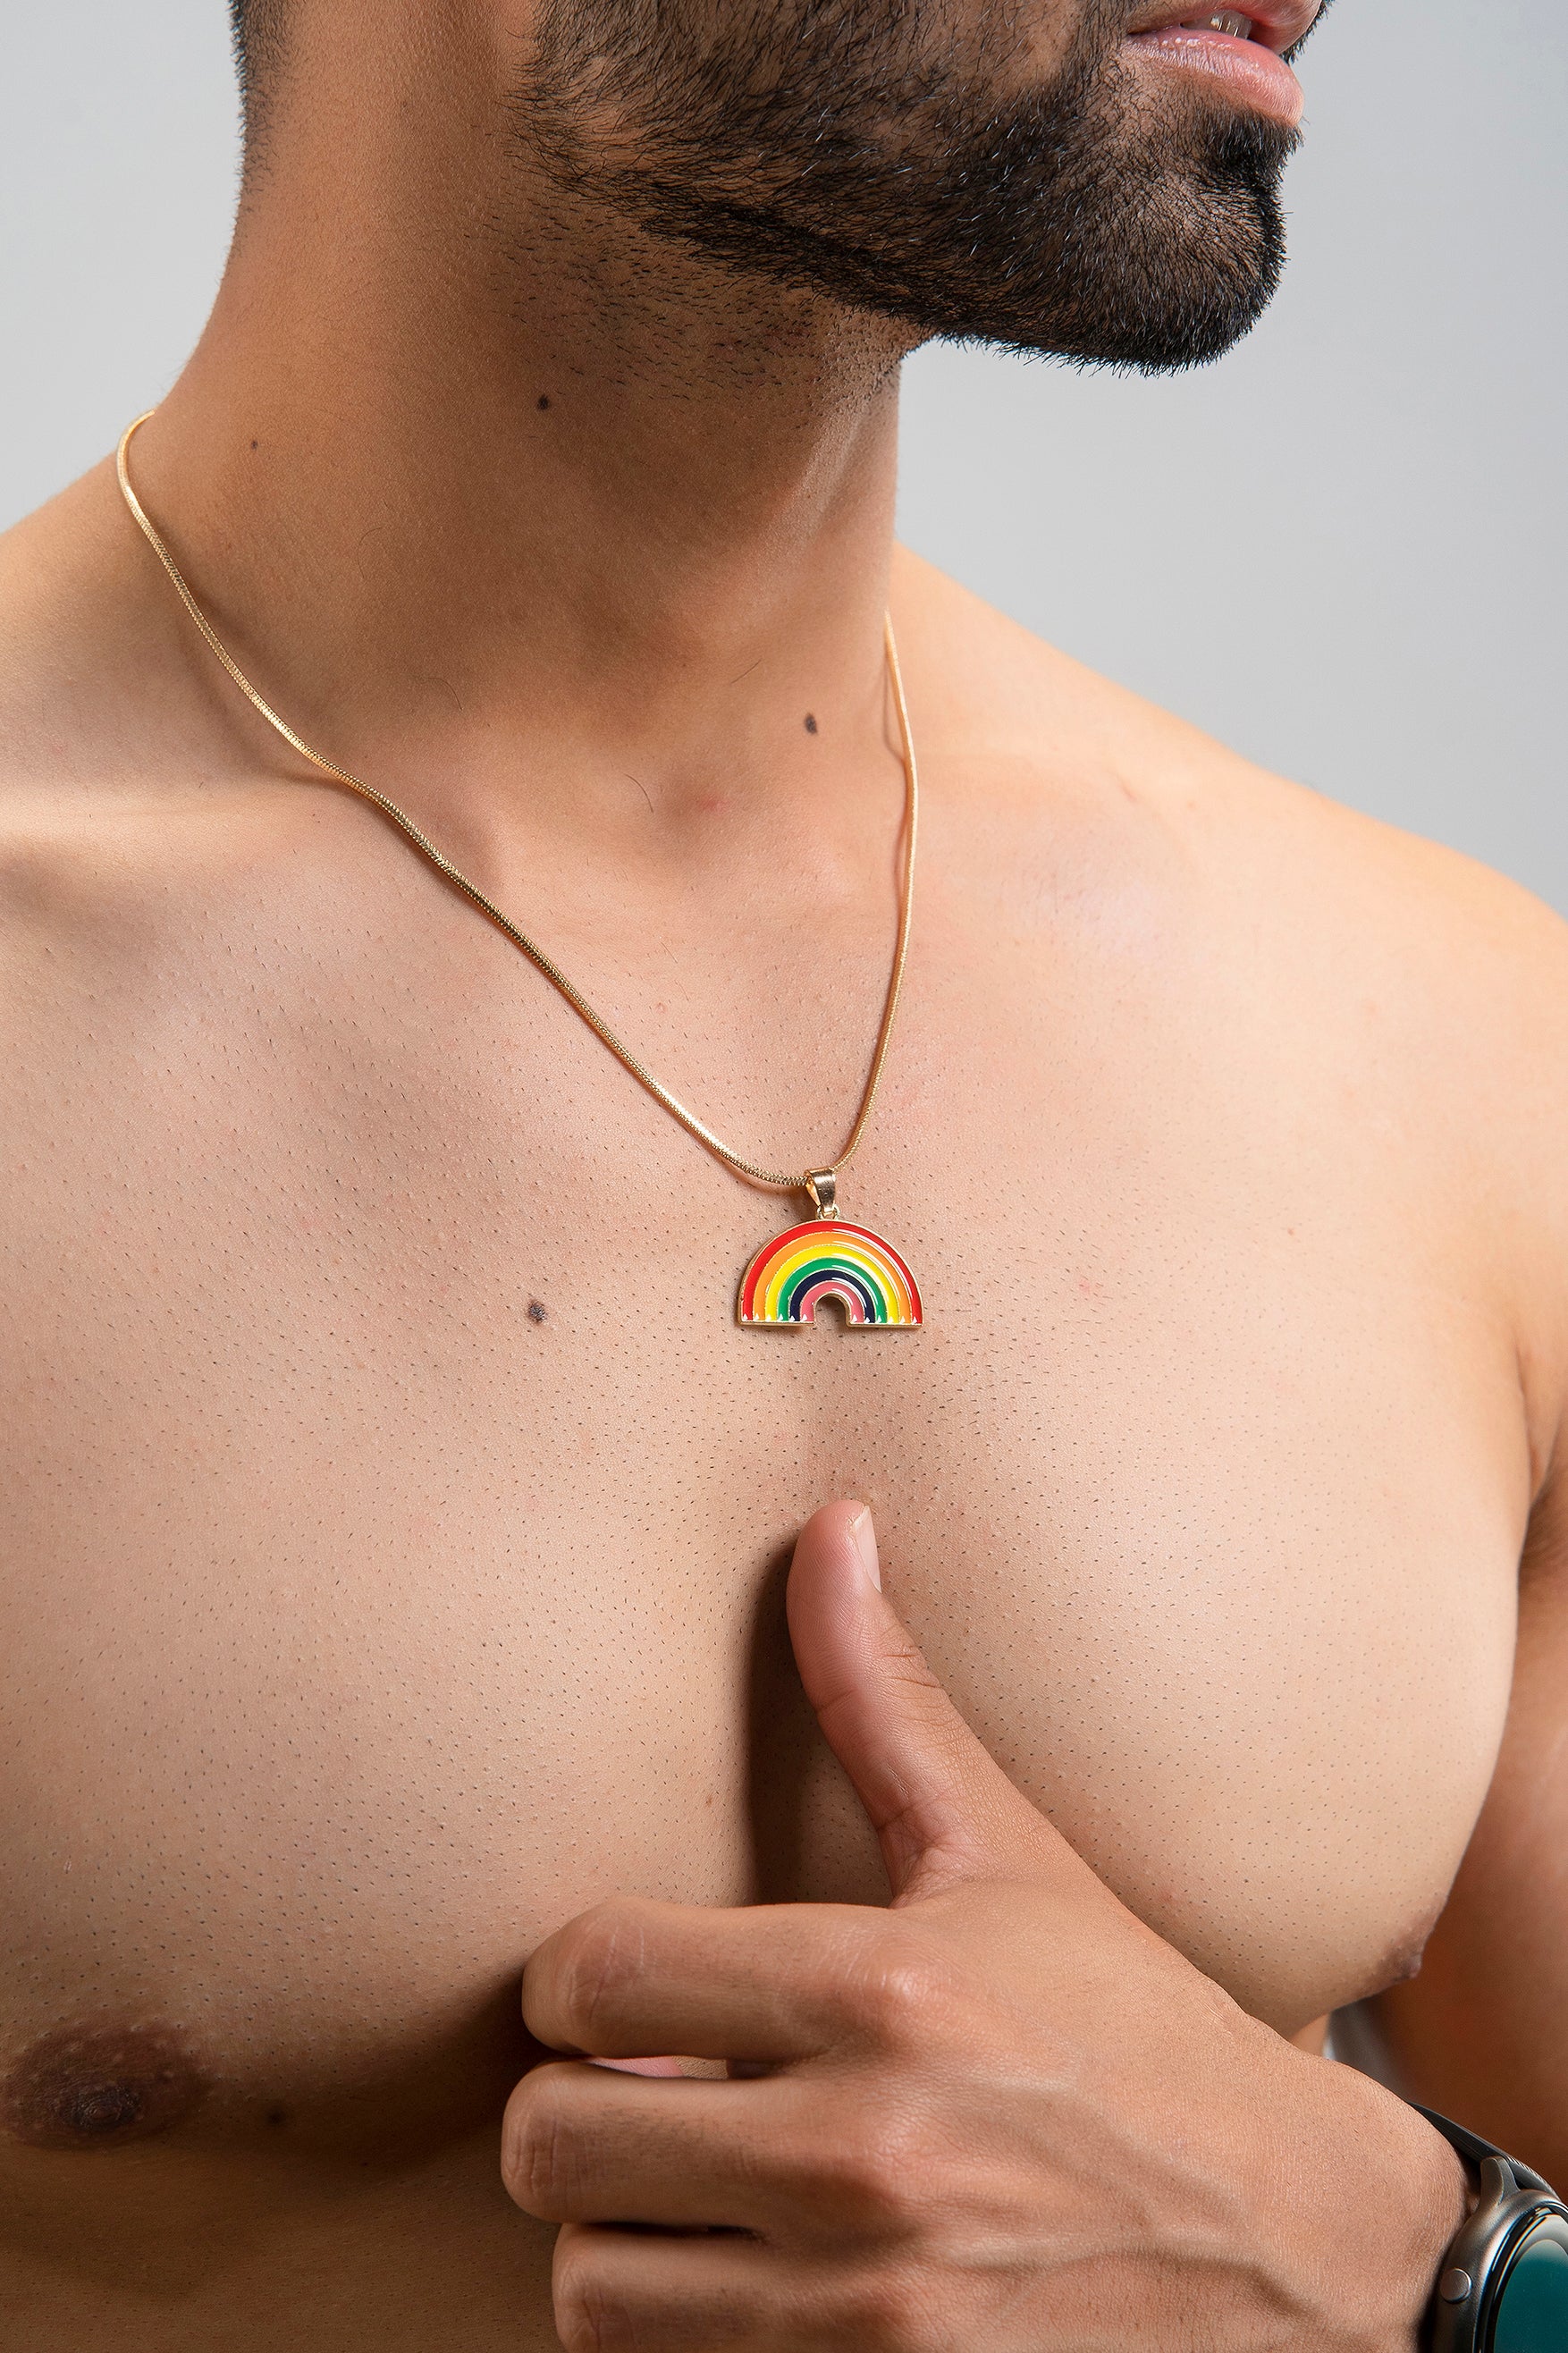 Firangi Yarn Rainbow Pride Pendant with Link Chain Necklace For Him